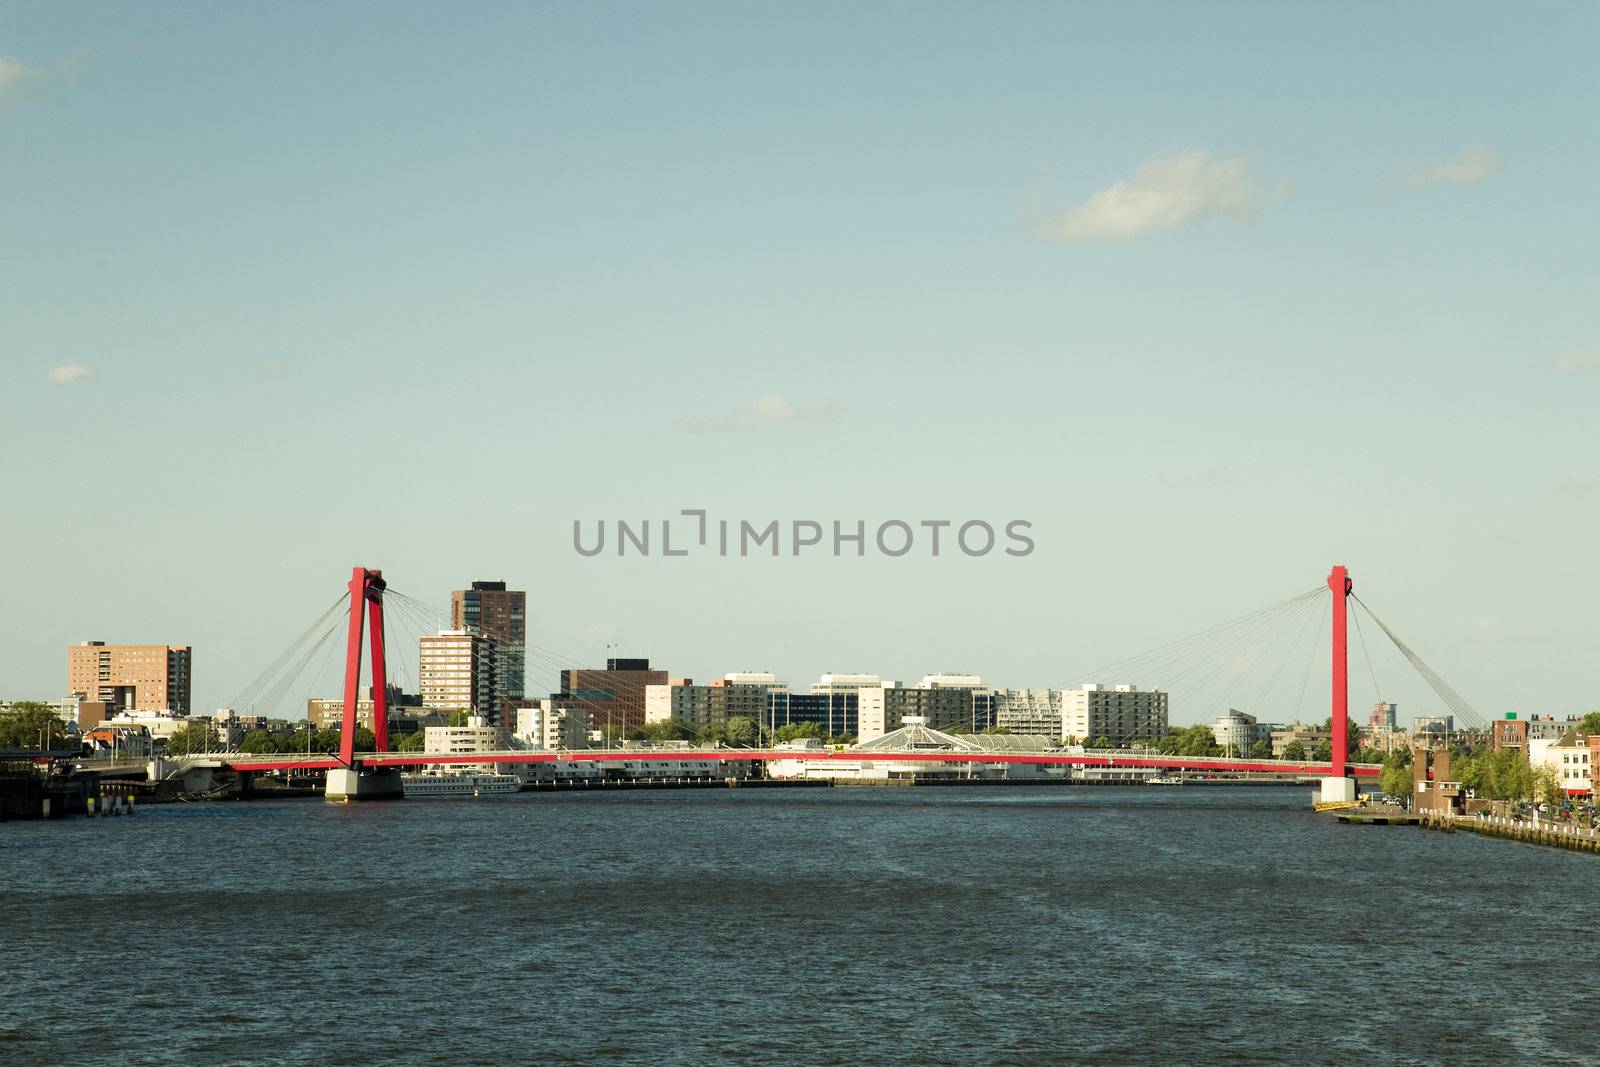 Willemsbrug in Rotterdam, the Netherlands with colors of old analog photo